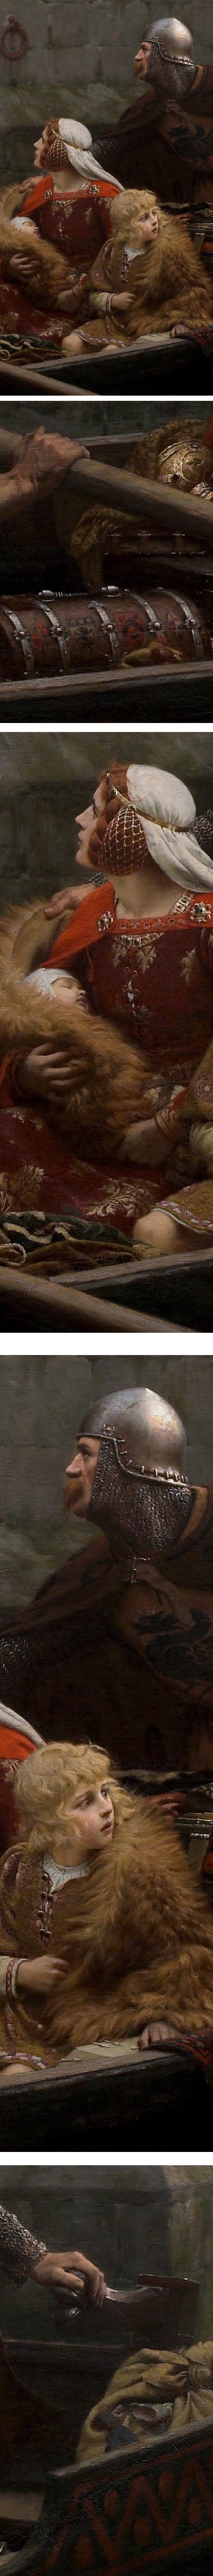 In Time of Peril, Edmund Leighton, oil on canvas (details)